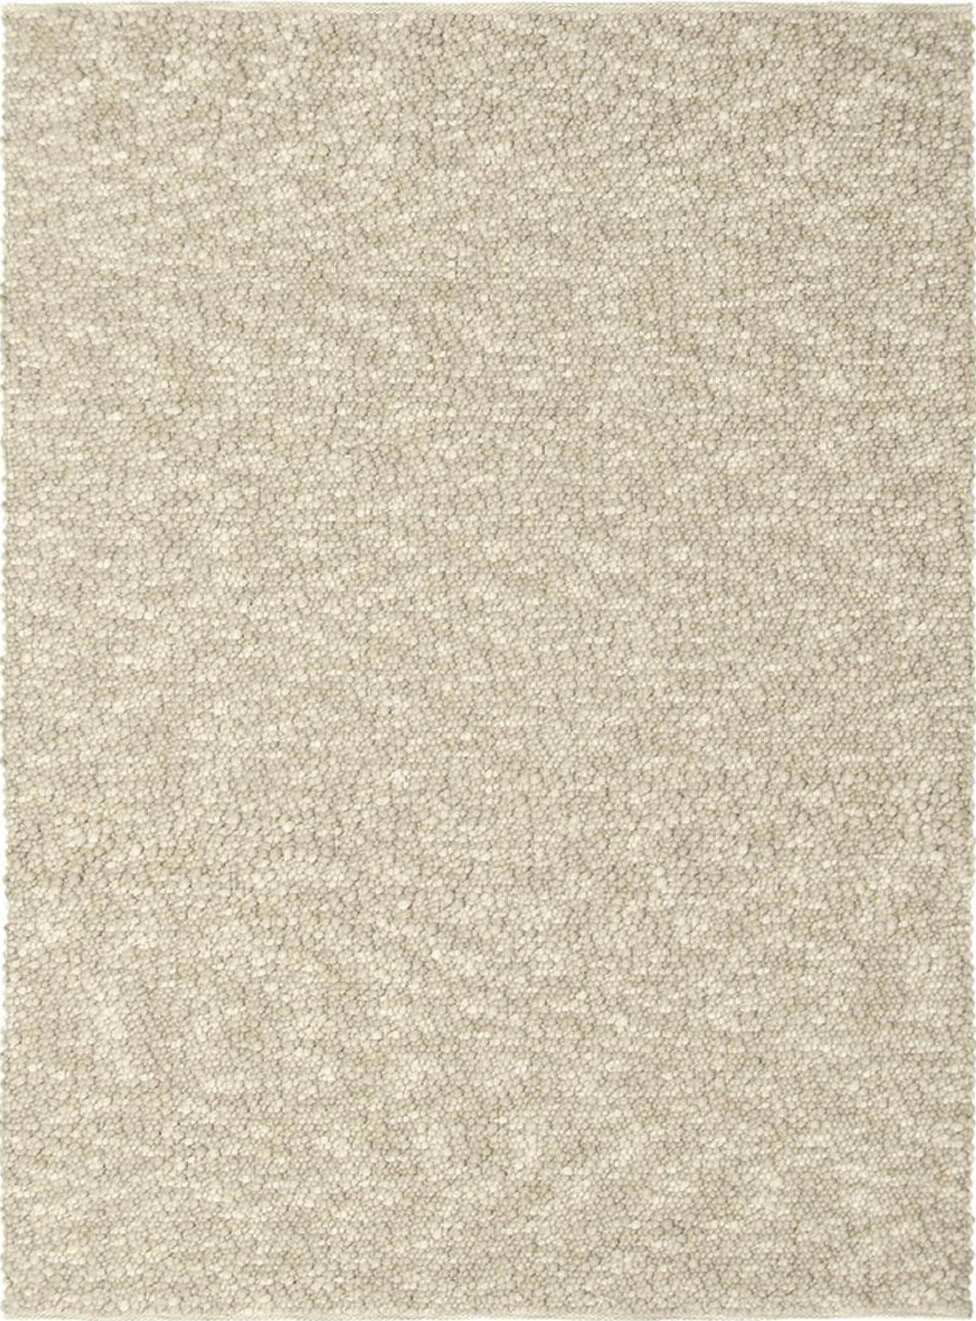 Stubble 29701 Rug by Brink & Campman